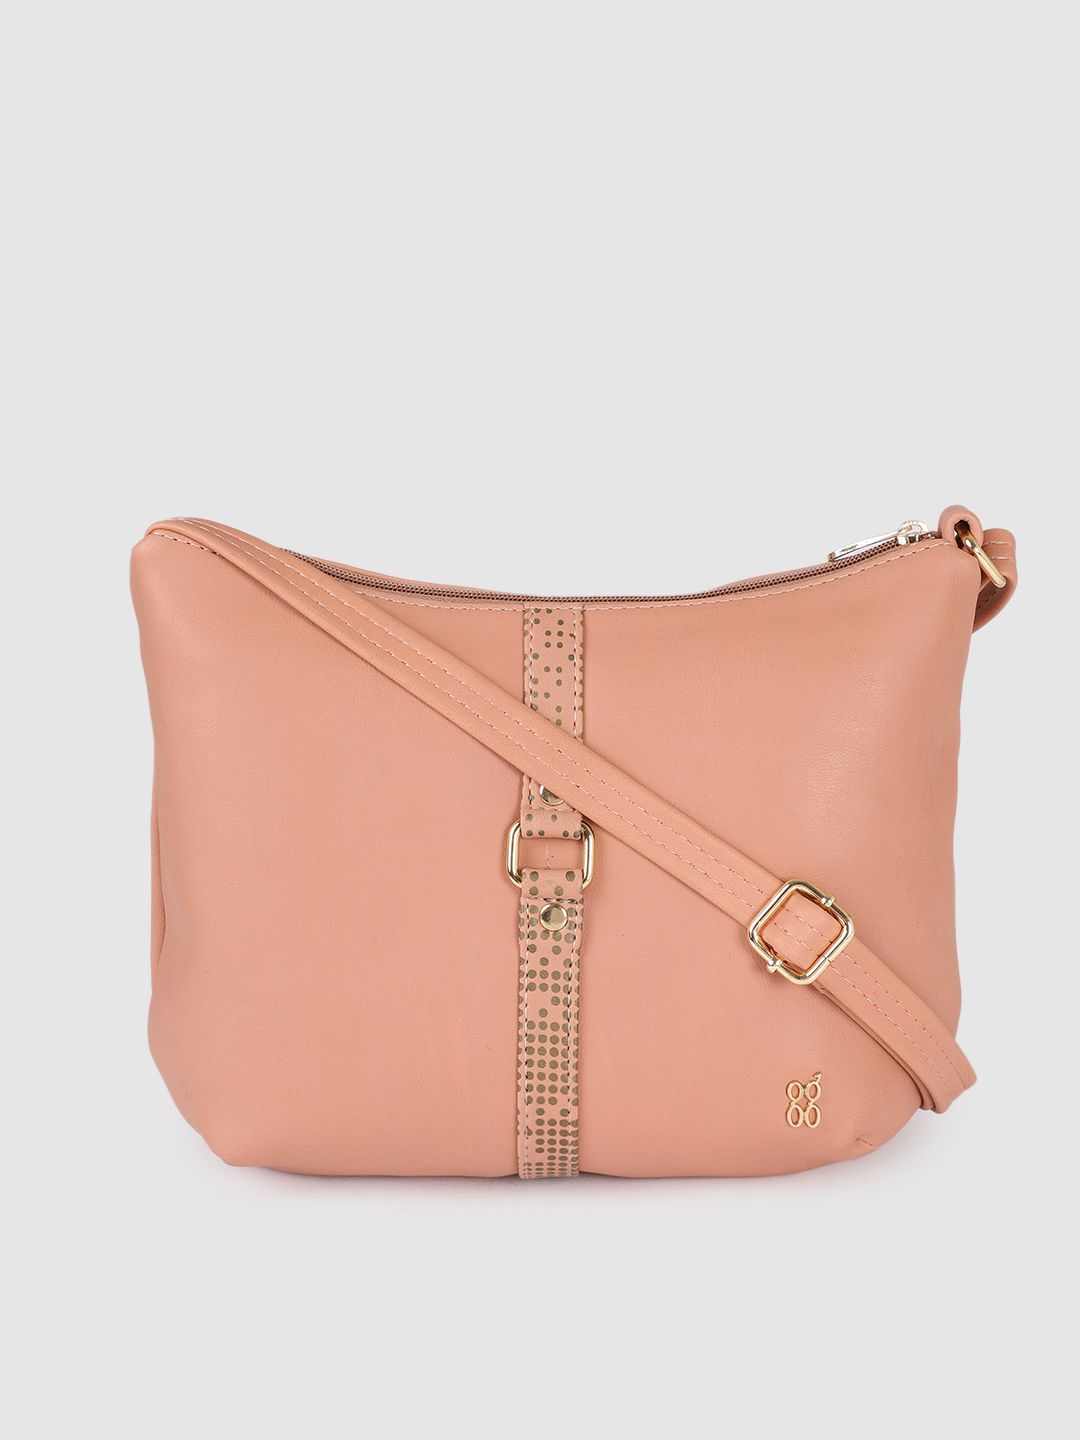 Baggit Pink Structured Sling Bag Price in India